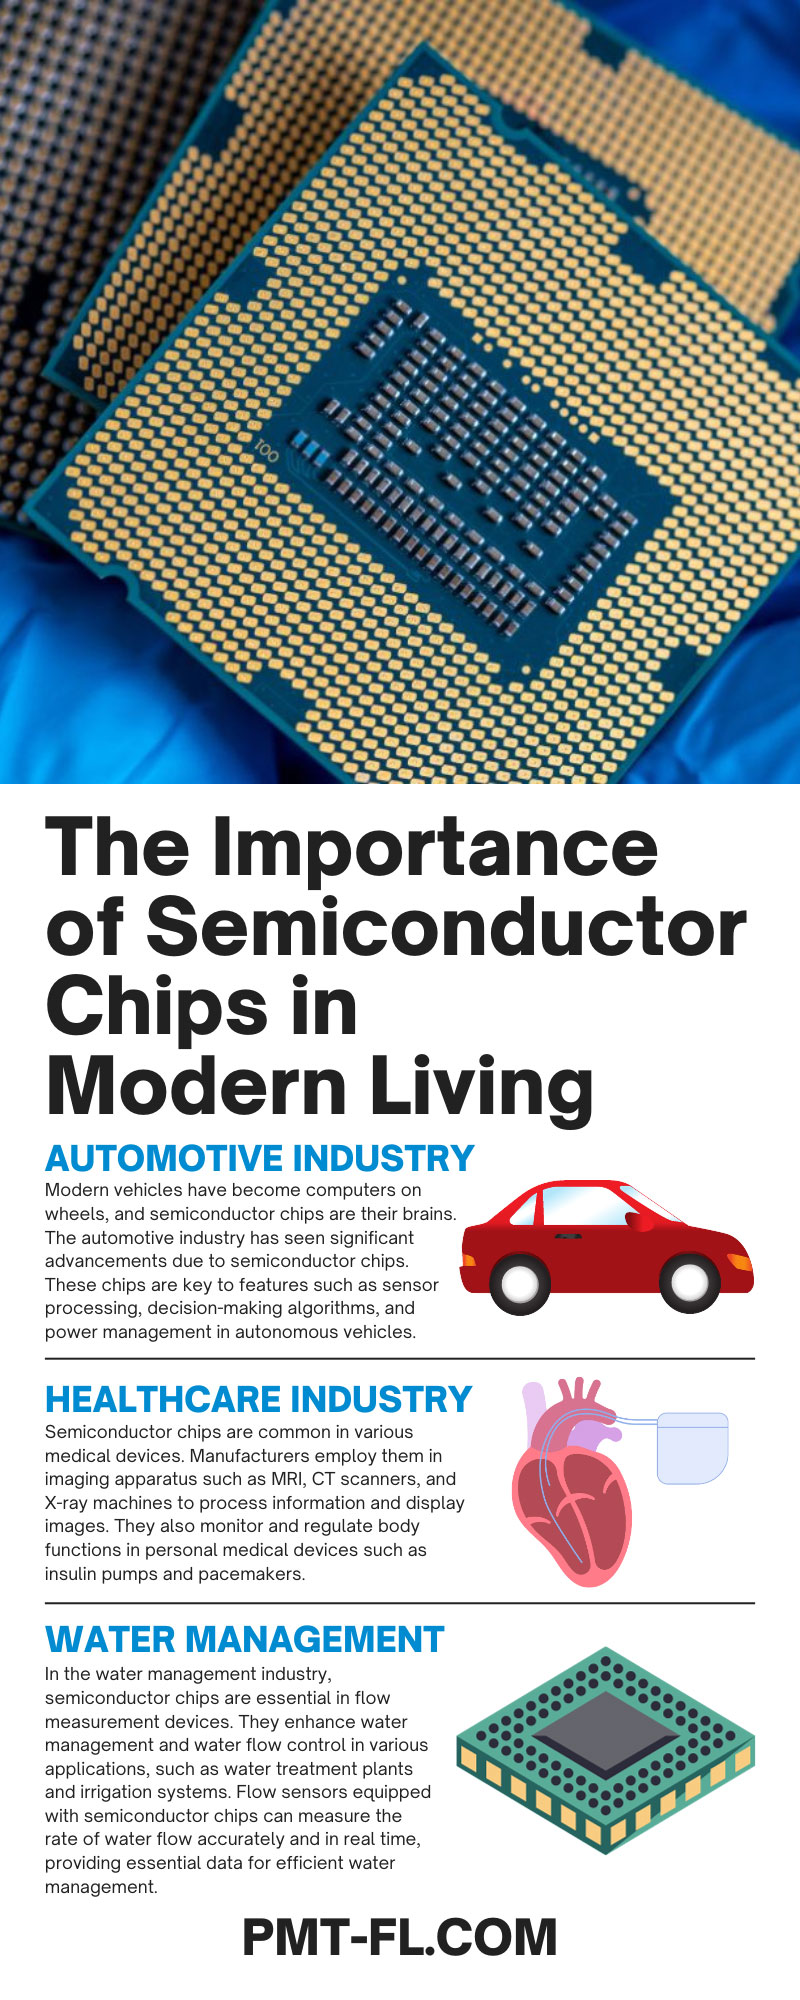 The Importance of Semiconductor Chips in Modern Living